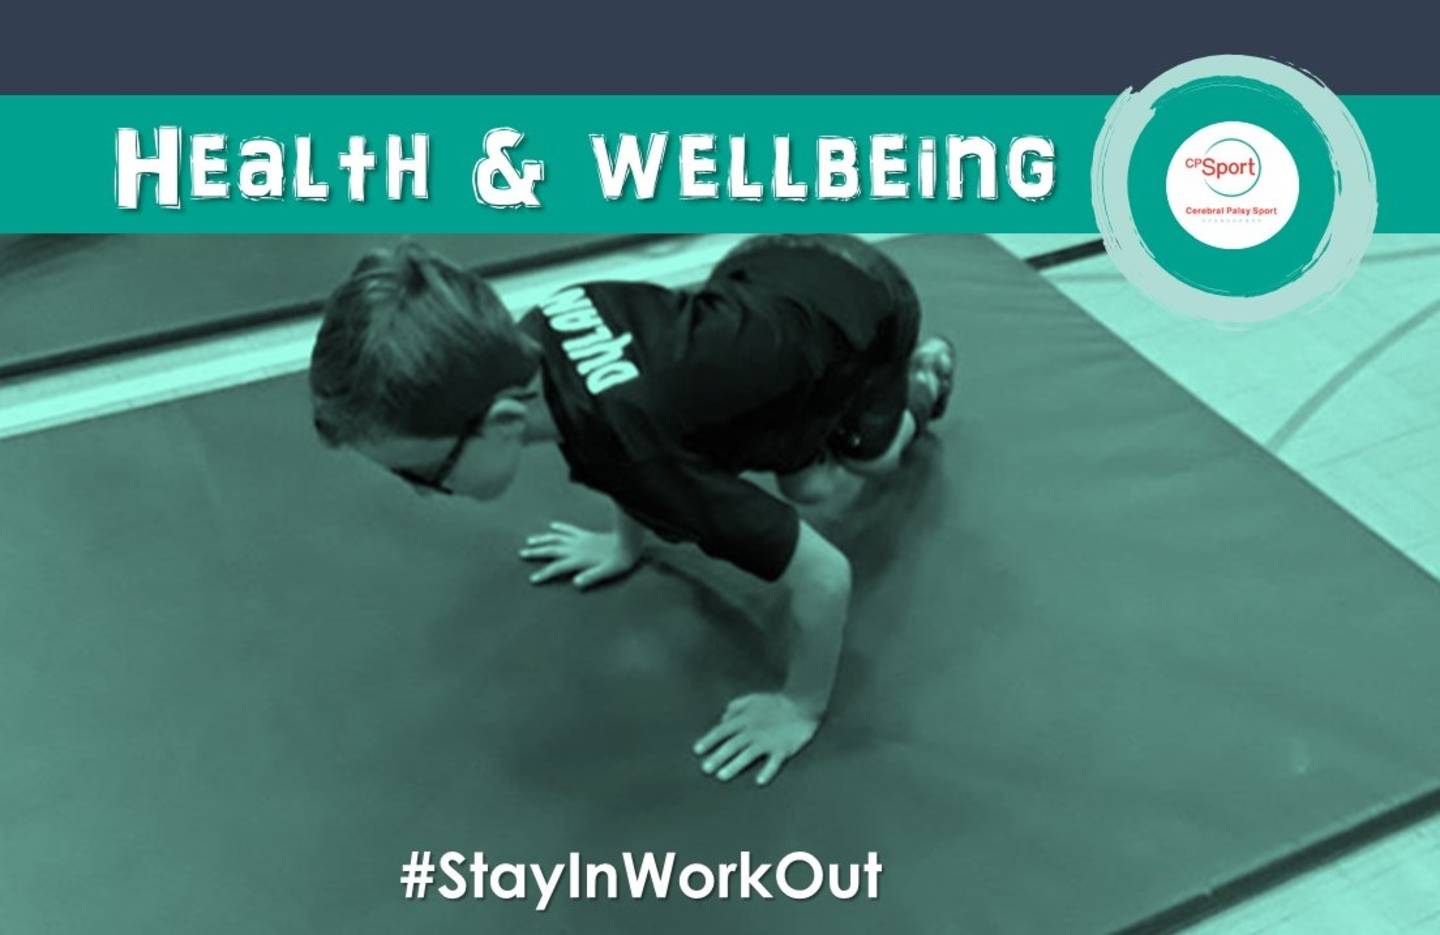 CP Sport graphic with CP Sport logo text reads: Health and wellbeing #StayInWorkOut